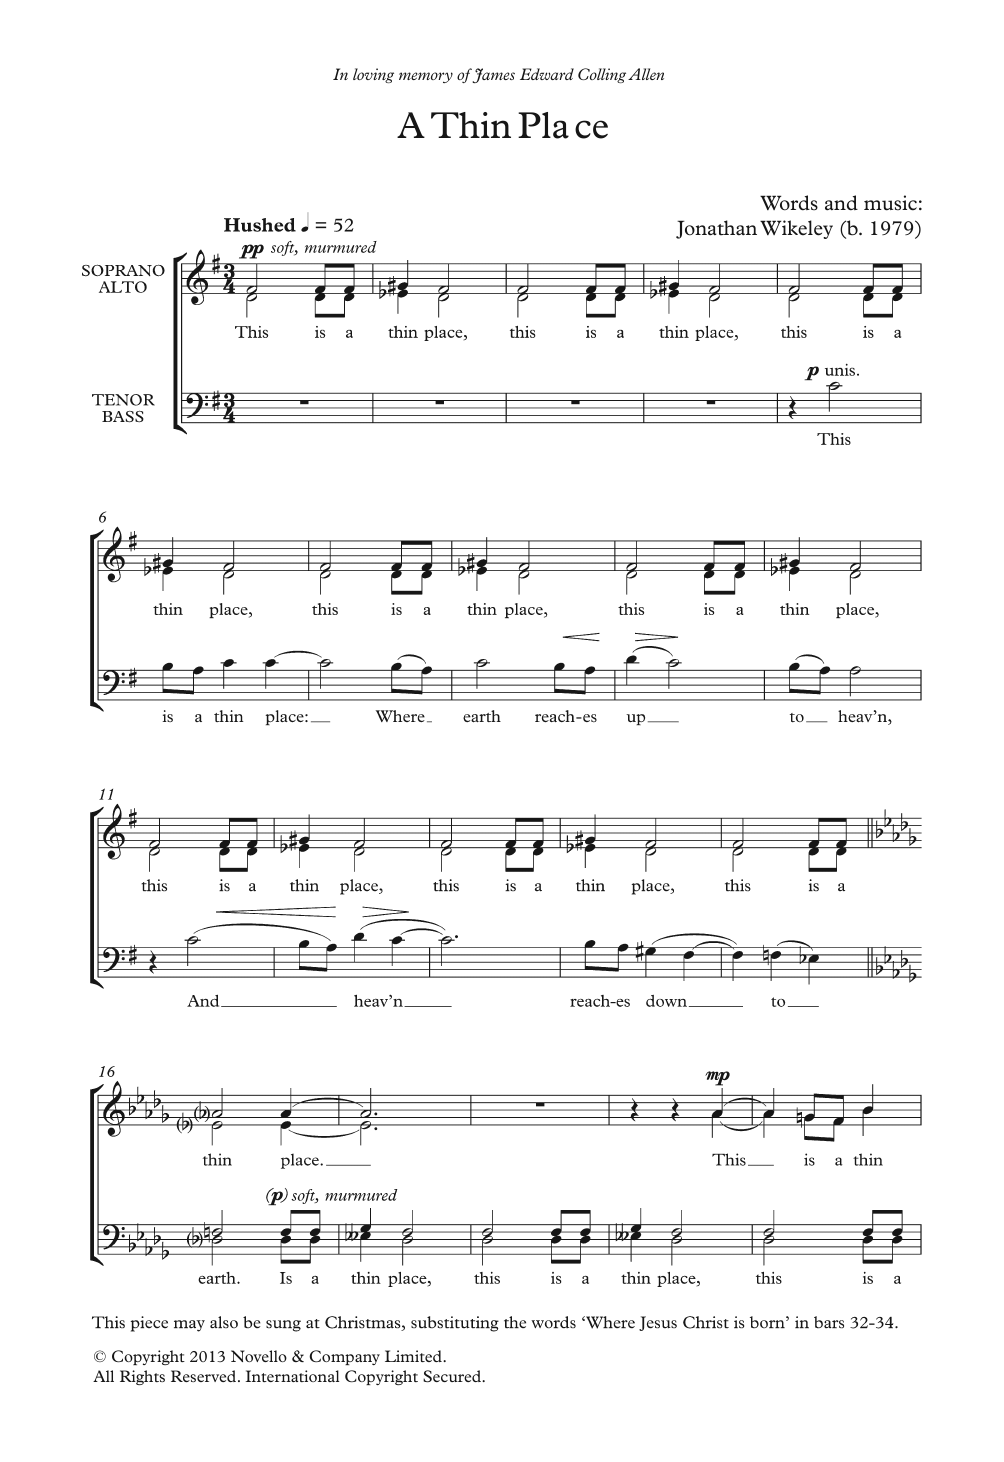 Download Jonathan Wikeley A Thin Place Sheet Music